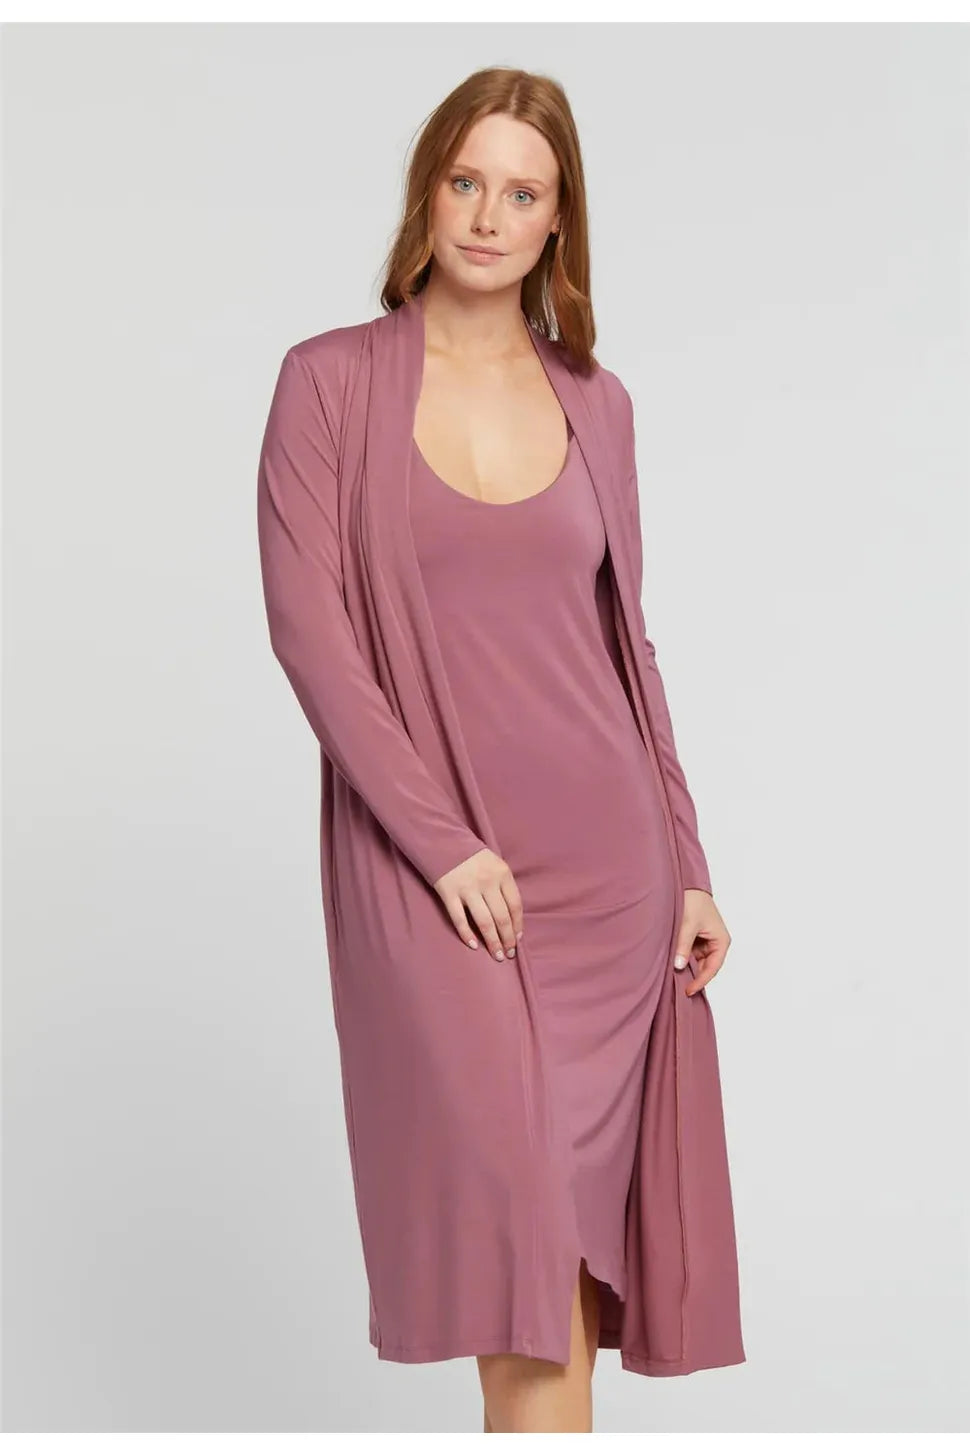 Fleur't Day or Night Robe - Style 6311, front, mesa rose